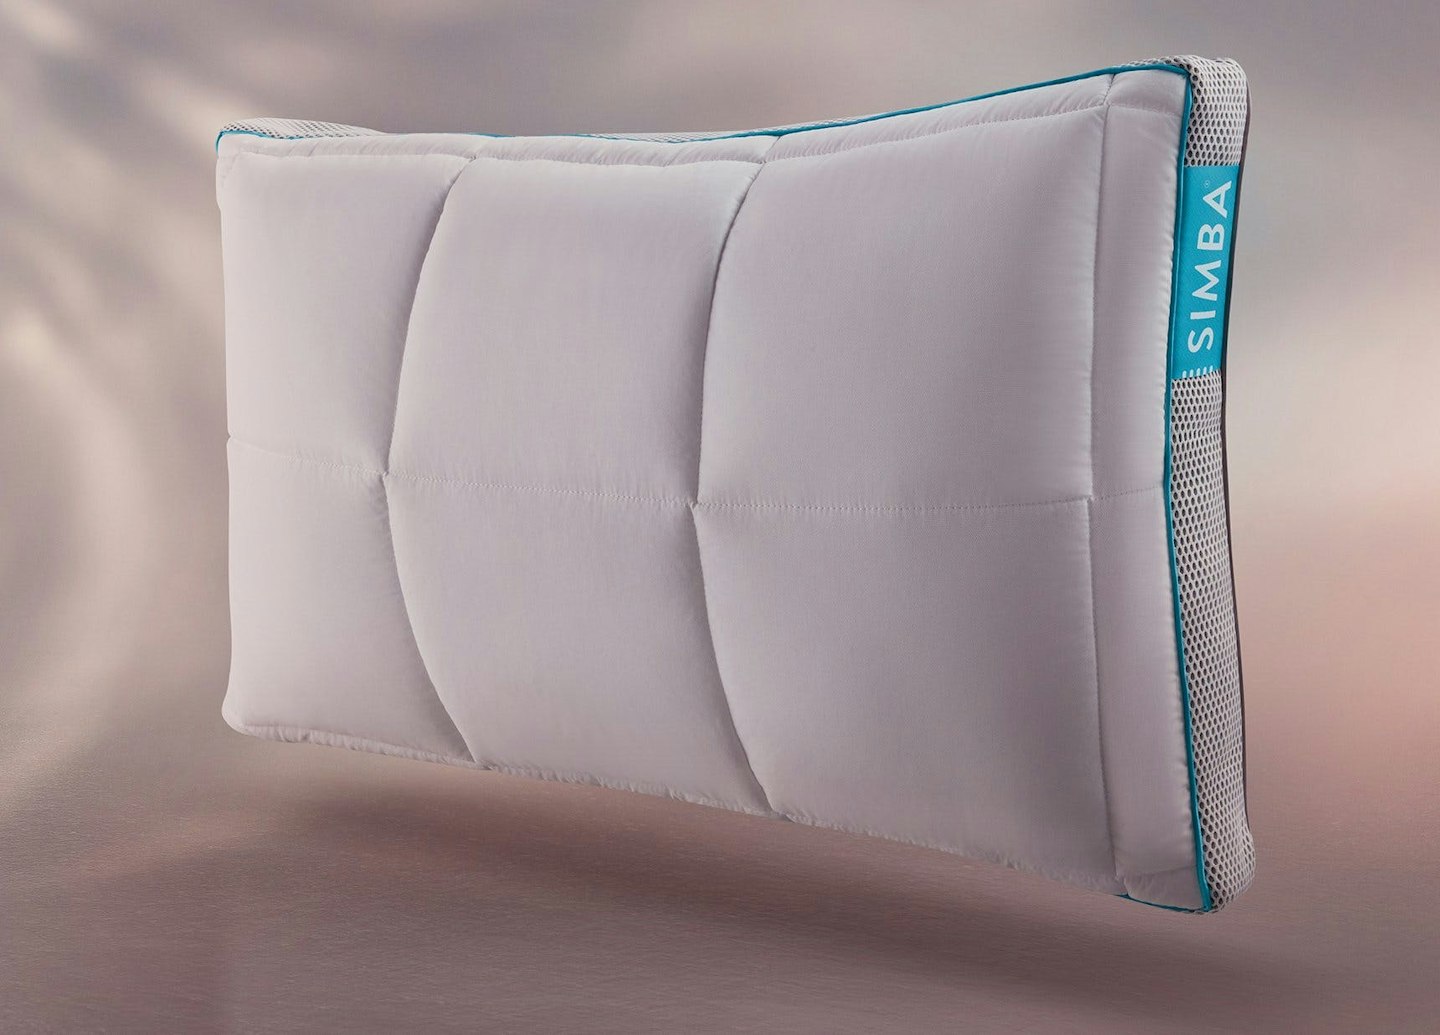 Best cooling pillows: The Simba Hybrid Pillow